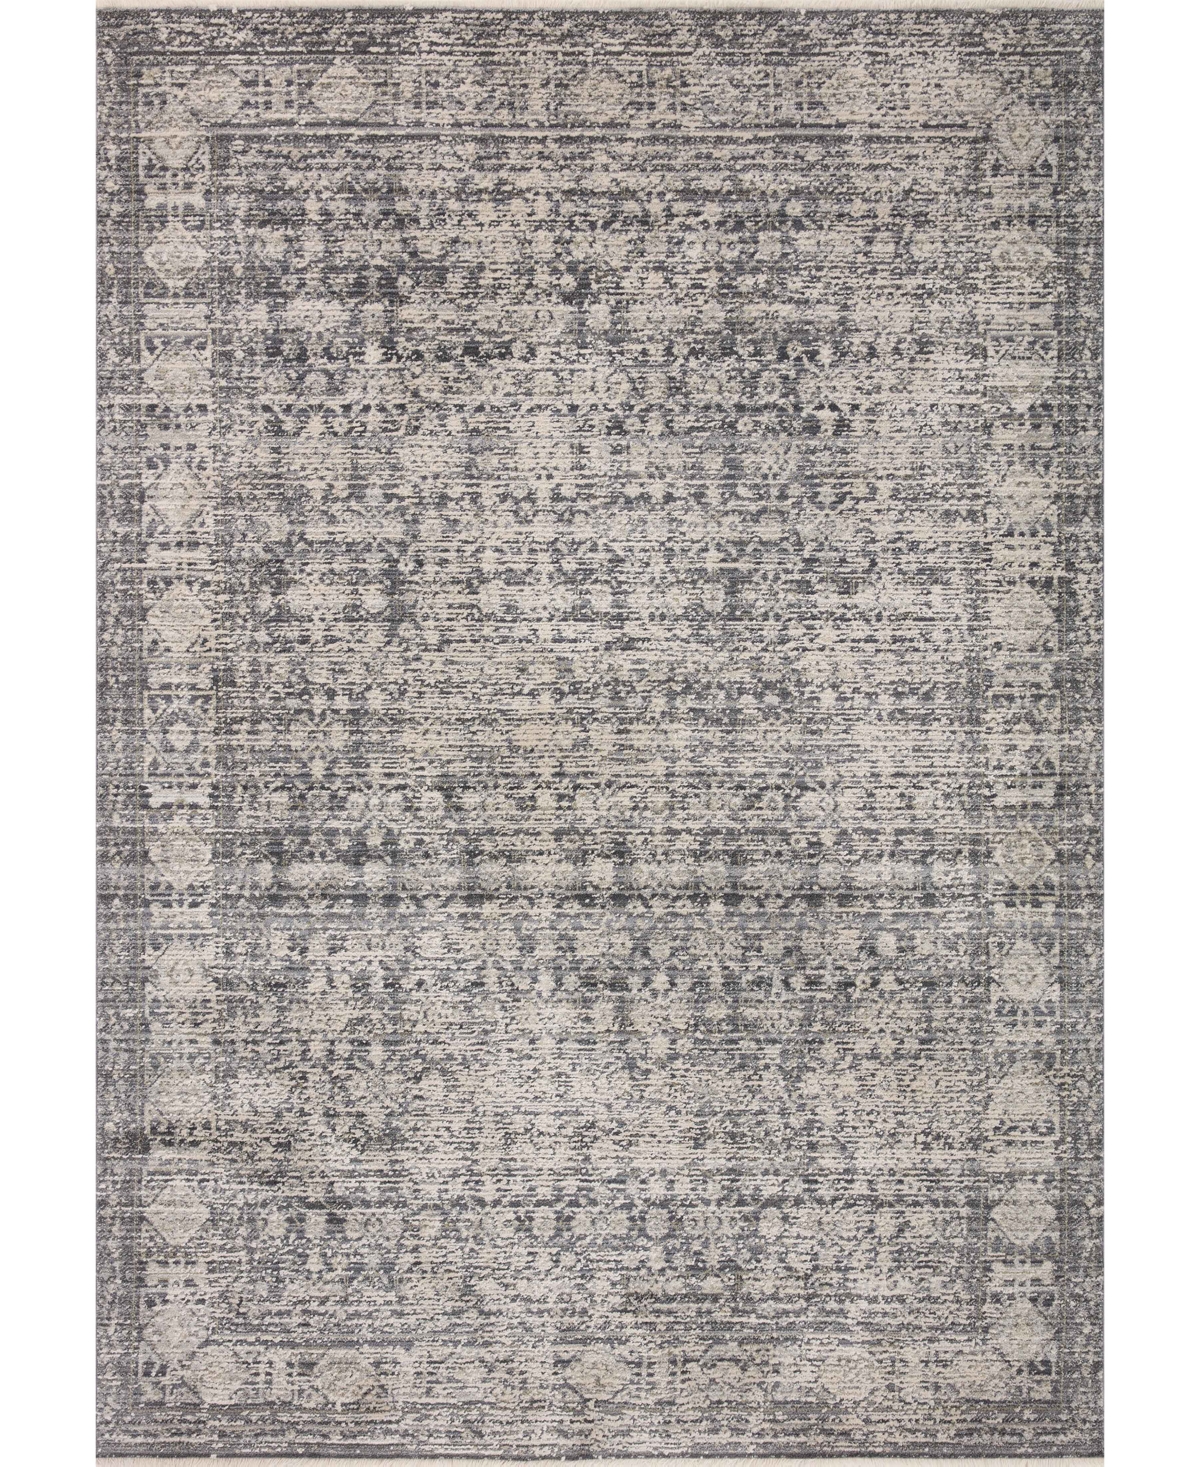 Amber Lewis X Loloi Alie Ale-03 7'10" X 10' Area Rug In Charcoal